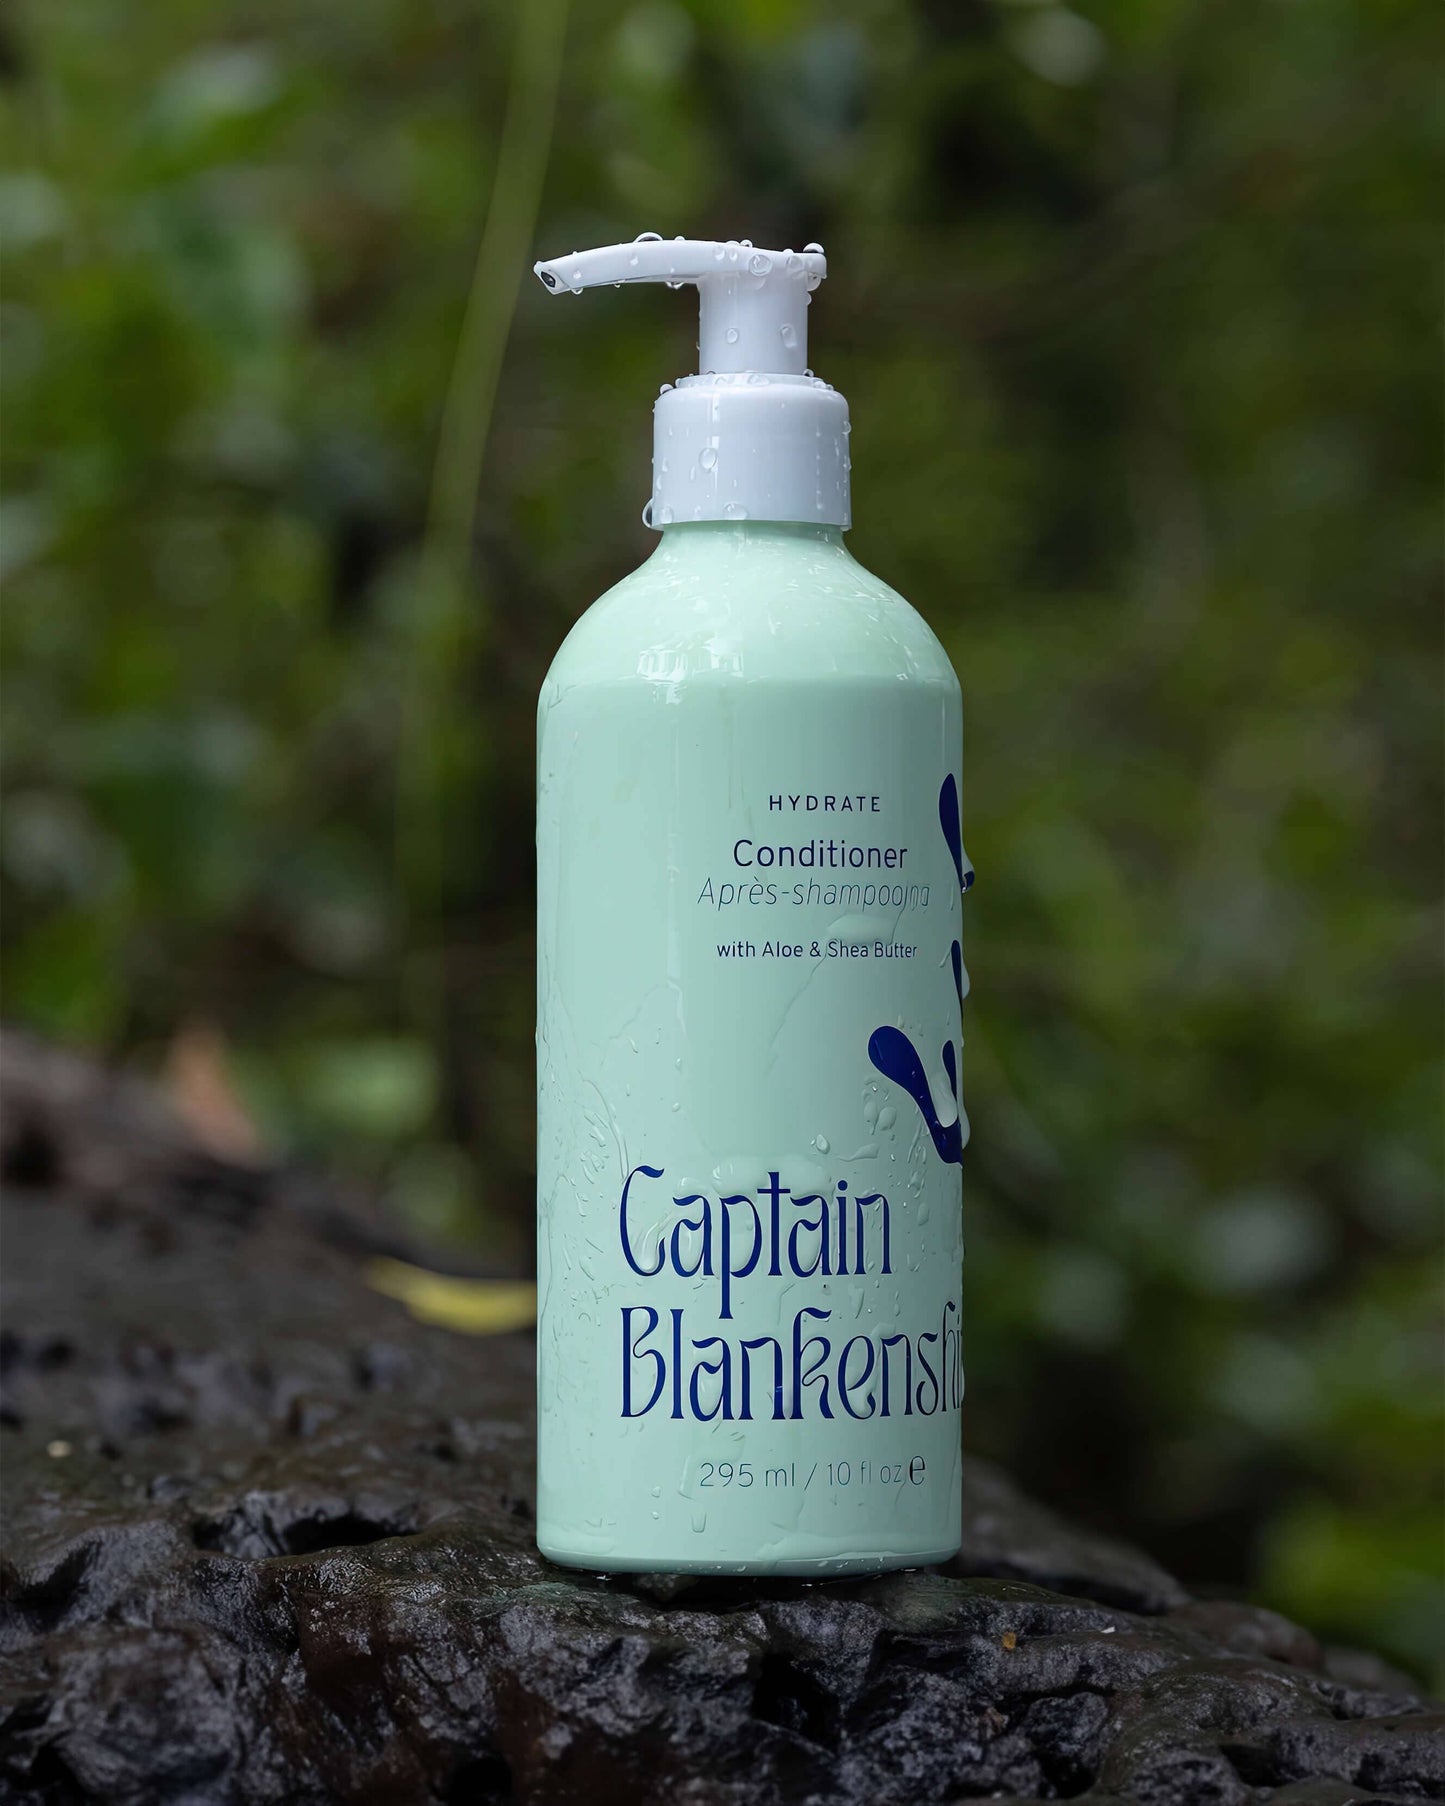 Captain Blankenship Hydrate Conditioner